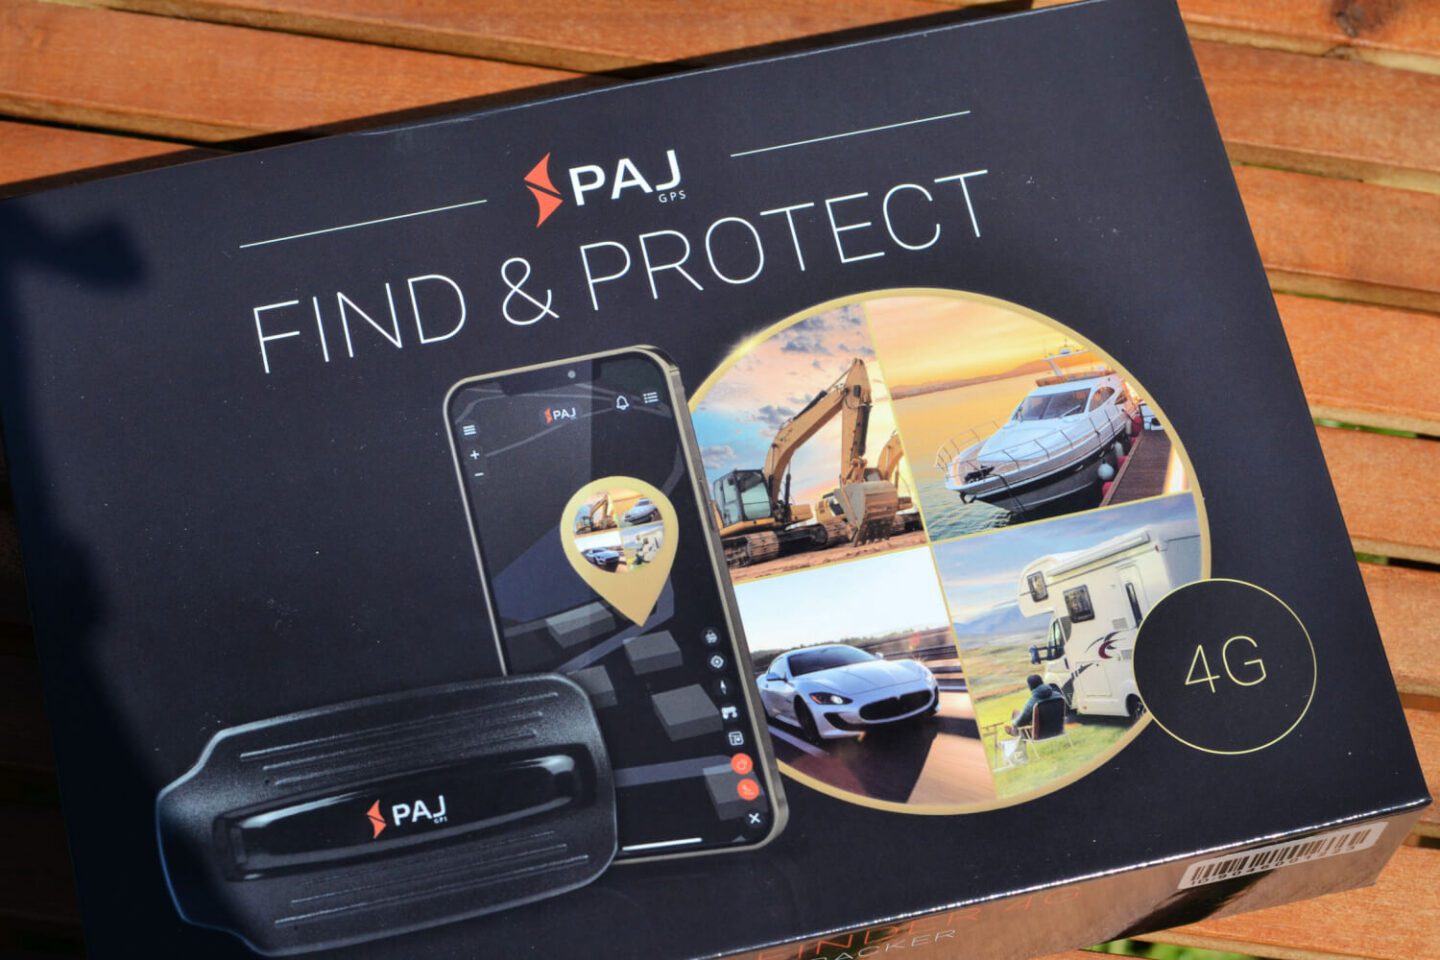 PAJ Easy Finder GPS Tracker - REVIEW